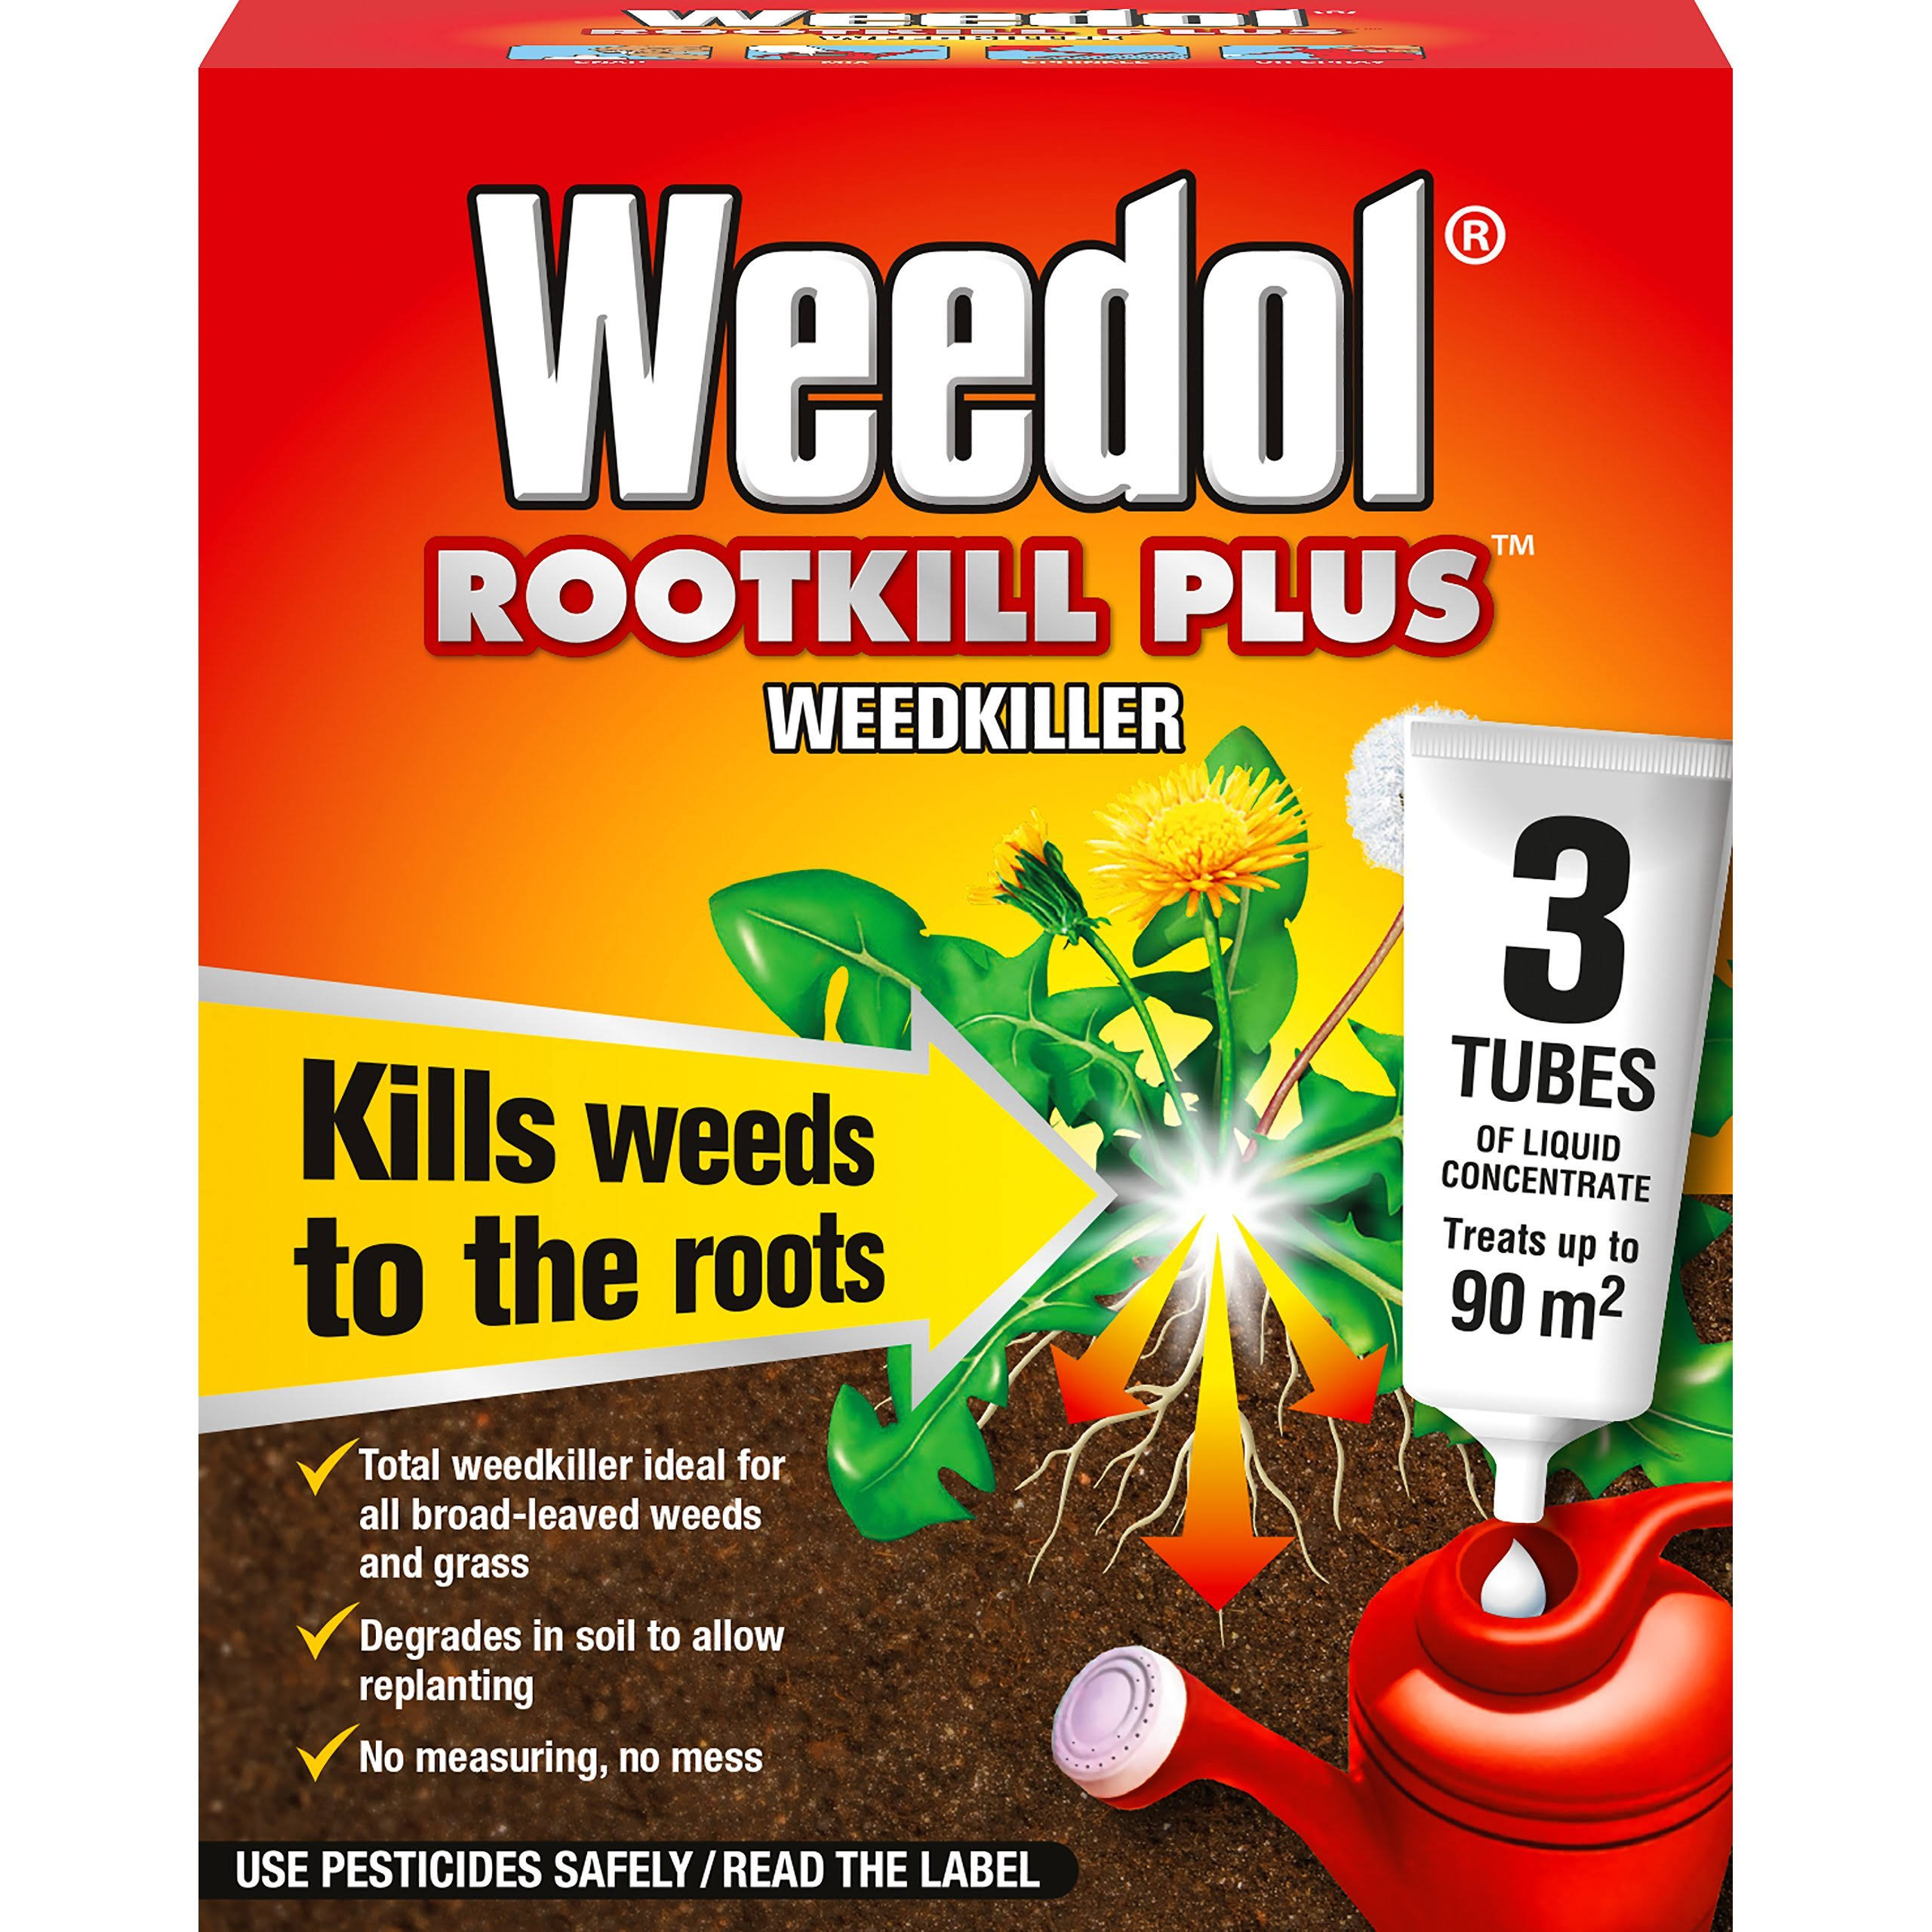 Weedol Rootkill Plus Concentrate - 3 Tubes